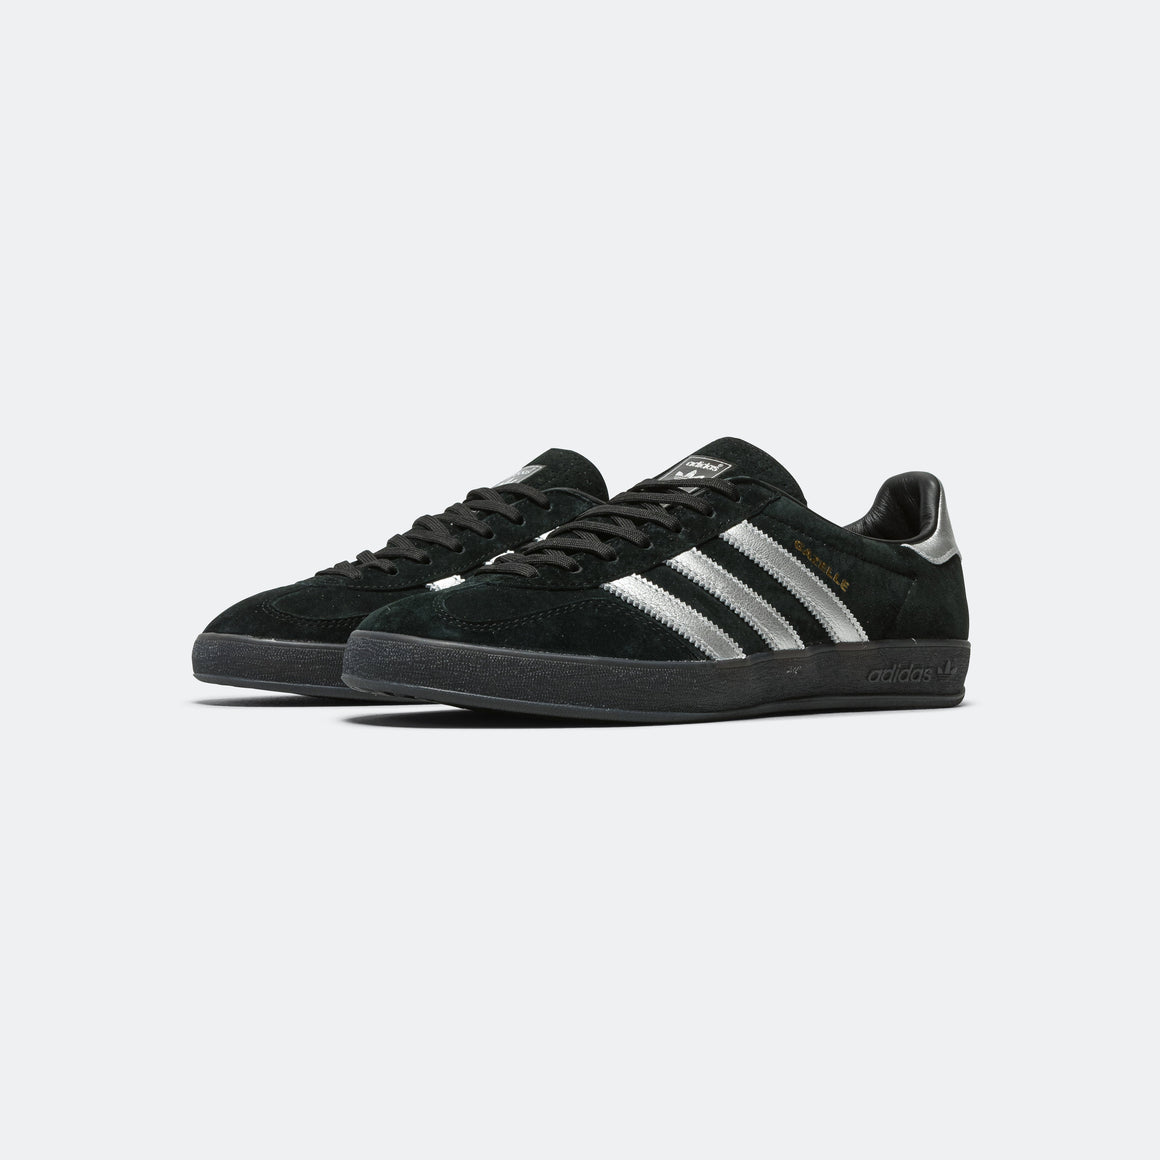 adidas - Gazelle Indoor - Core Black/Metallic Silver - UP THERE